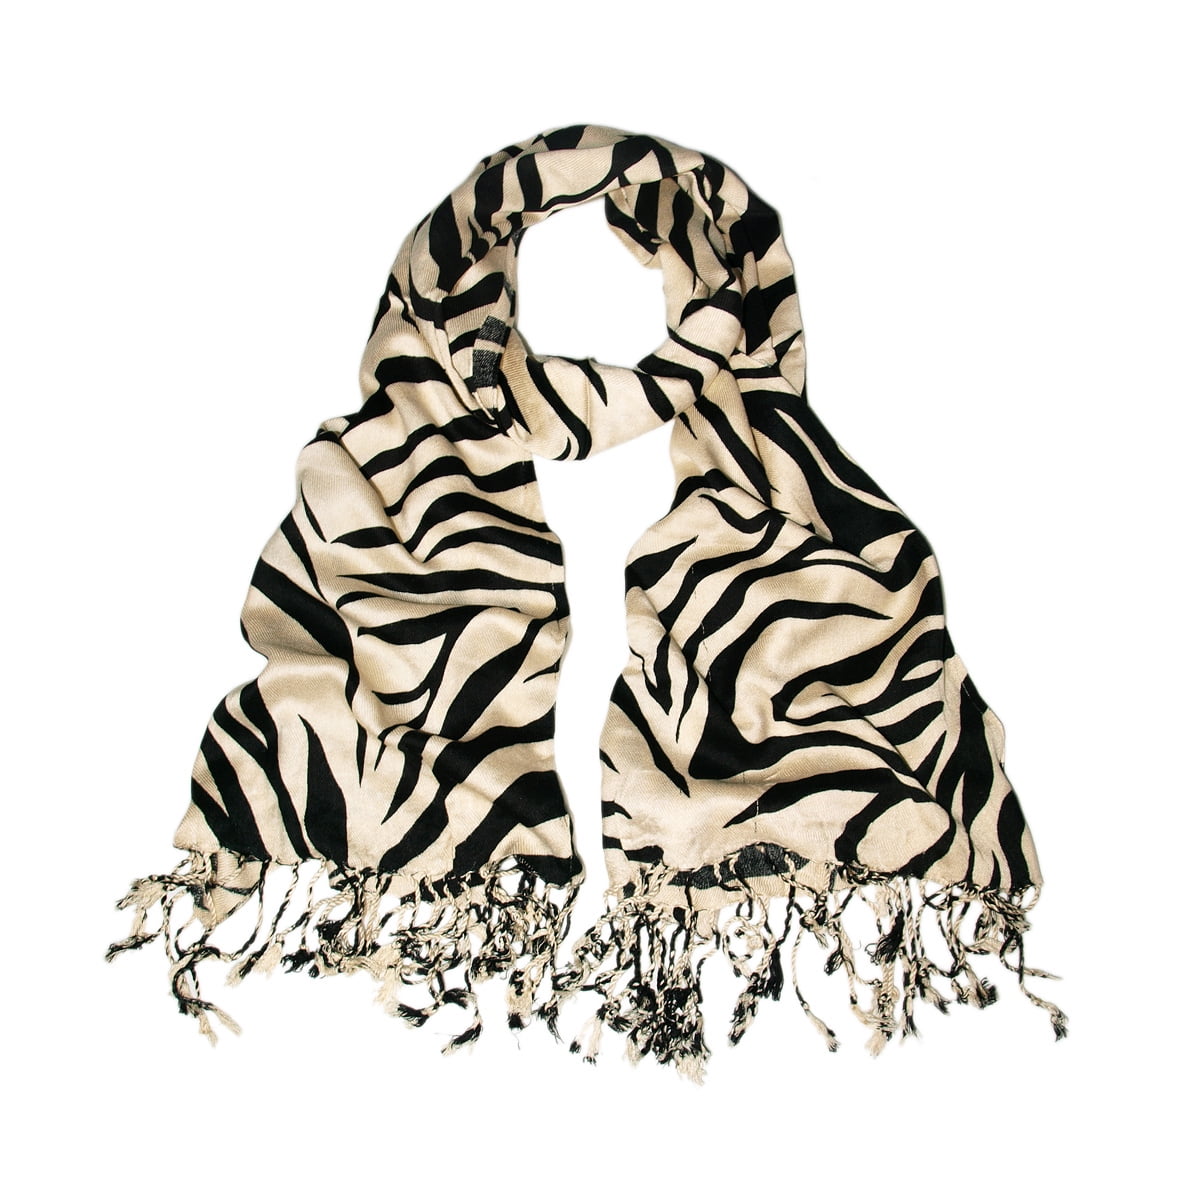 Fashion Lady Shawls,Comfortable Warm Winter Scarfs Soft Cashmere Scarf For Women Colorful Colourful Exotic Pattern Palm Animal And Modern Abstract